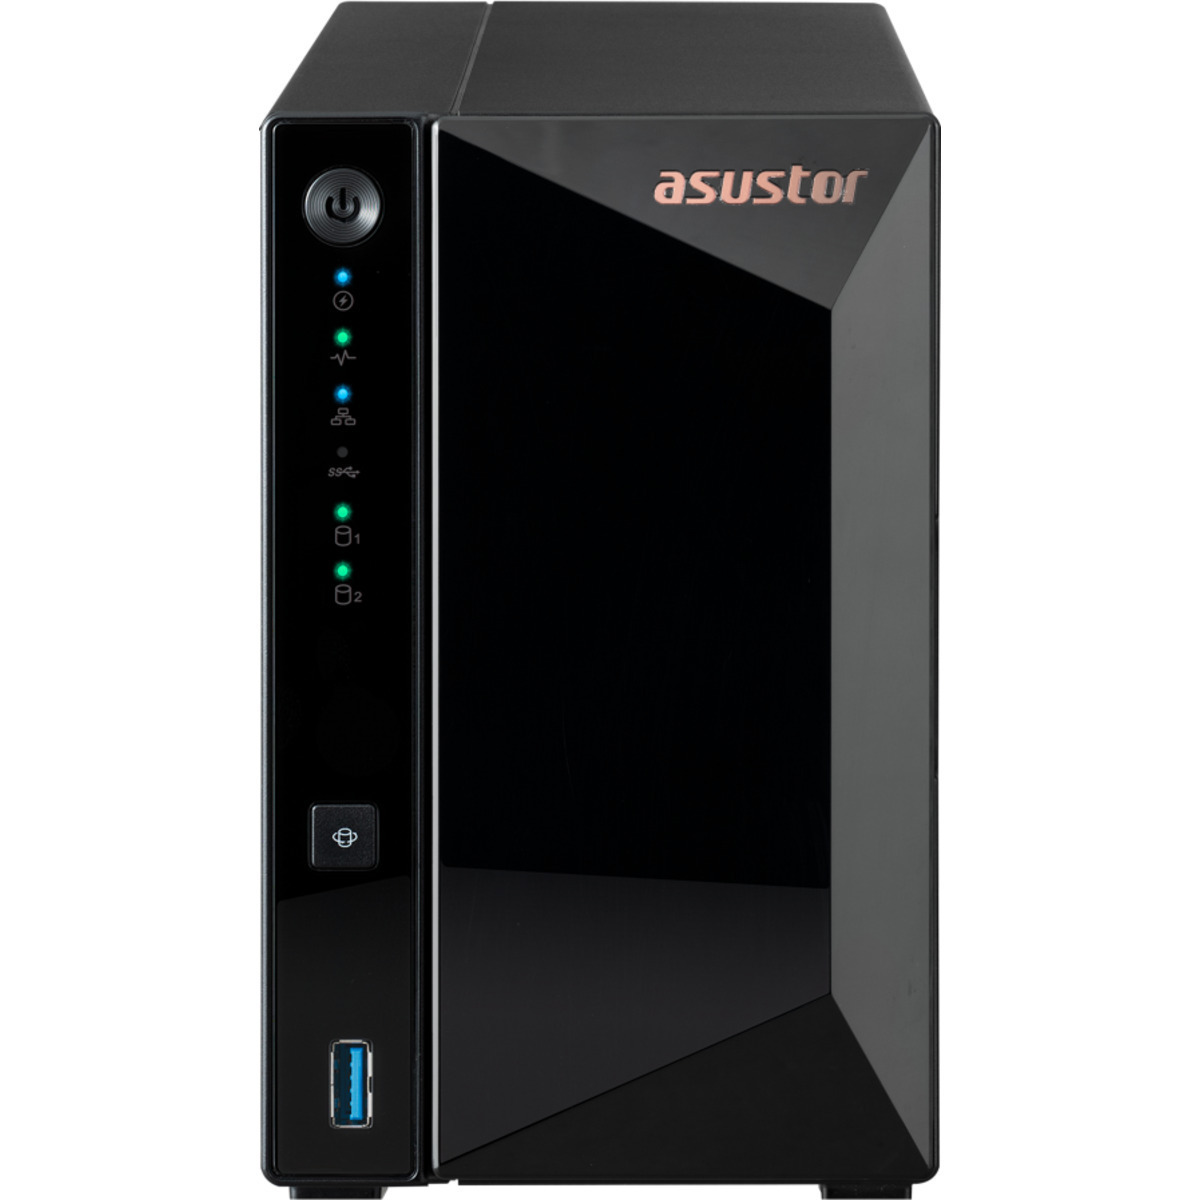 ASUSTOR DRIVESTOR 2 Pro Gen2 AS3302T v2 20tb 2-Bay Desktop Personal / Basic Home / Small Office NAS - Network Attached Storage Device 2x10tb Western Digital Red Pro WD102KFBX 3.5 7200rpm SATA 6Gb/s HDD NAS Class Drives Installed - Burn-In Tested - ON SALE DRIVESTOR 2 Pro Gen2 AS3302T v2